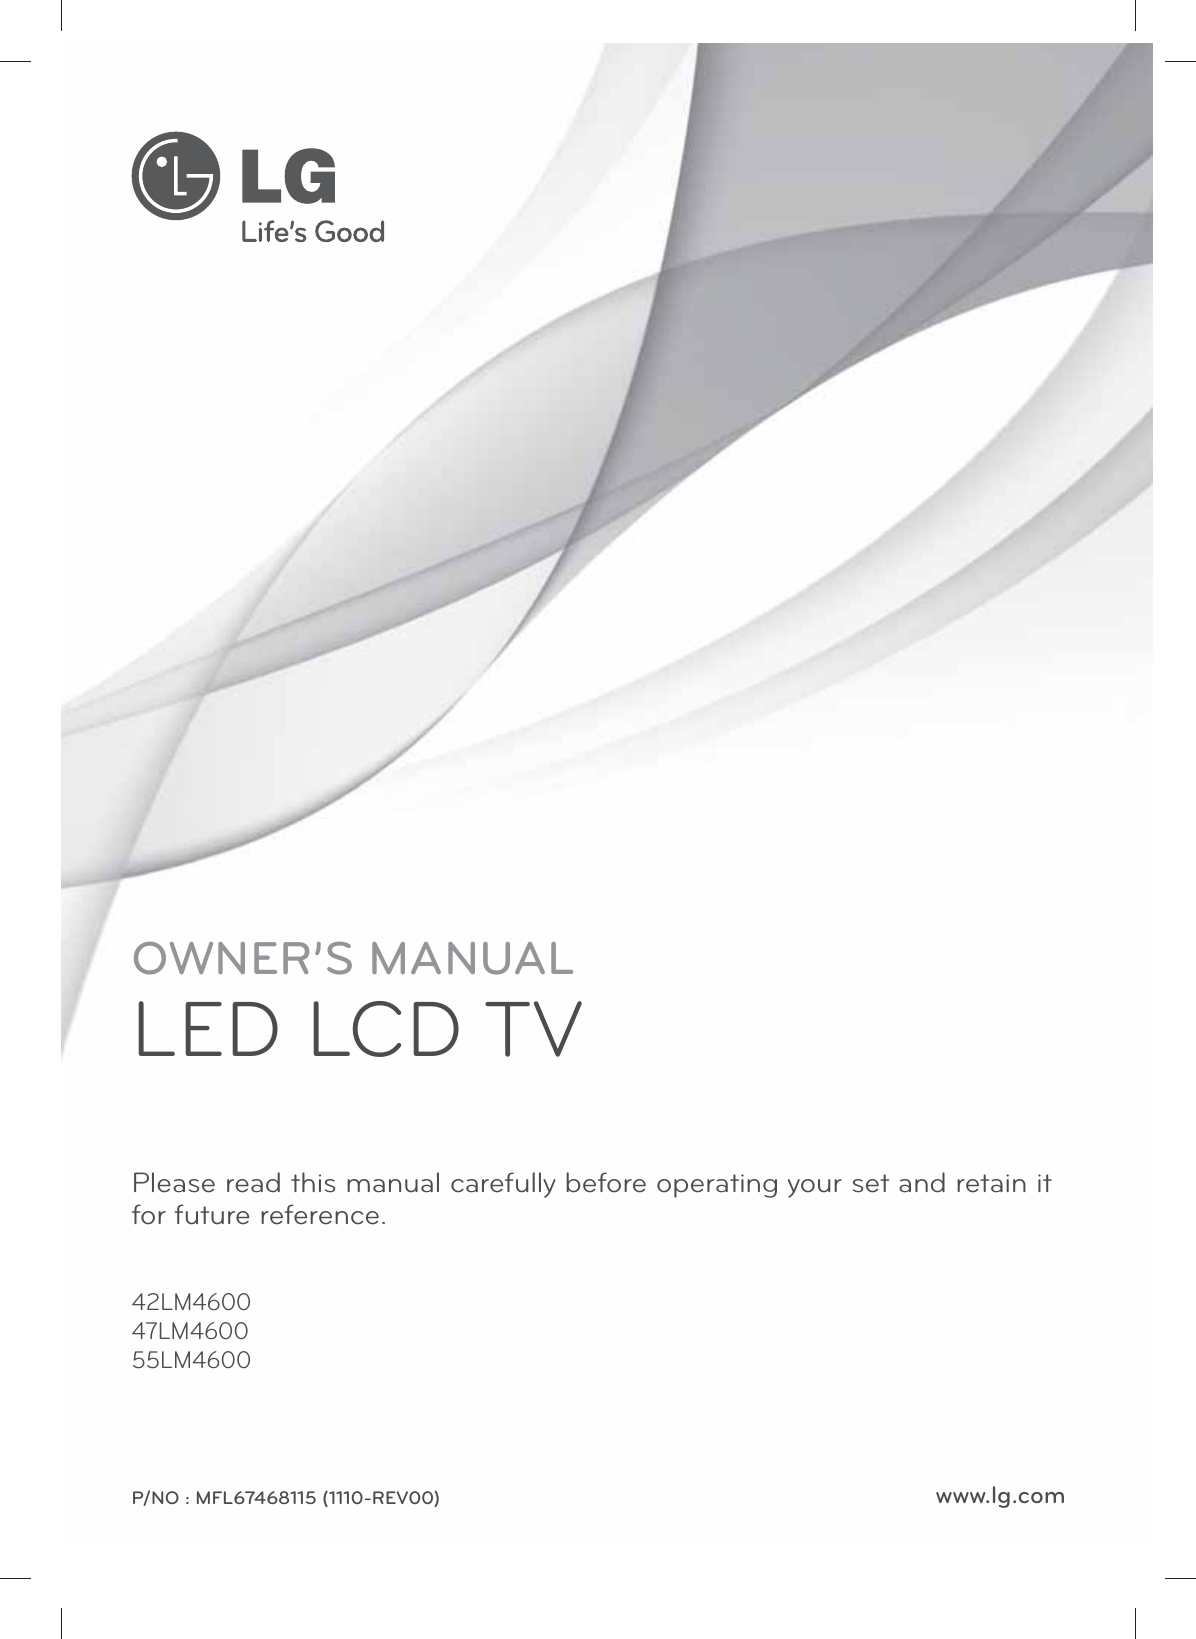 www.lg.comOWNER’S MANUALLED LCD TVPlease read this manual carefully before operating your set and retain it for future reference.42LM460047LM460055LM4600P/NO : MFL67468115 (1110-REV00)